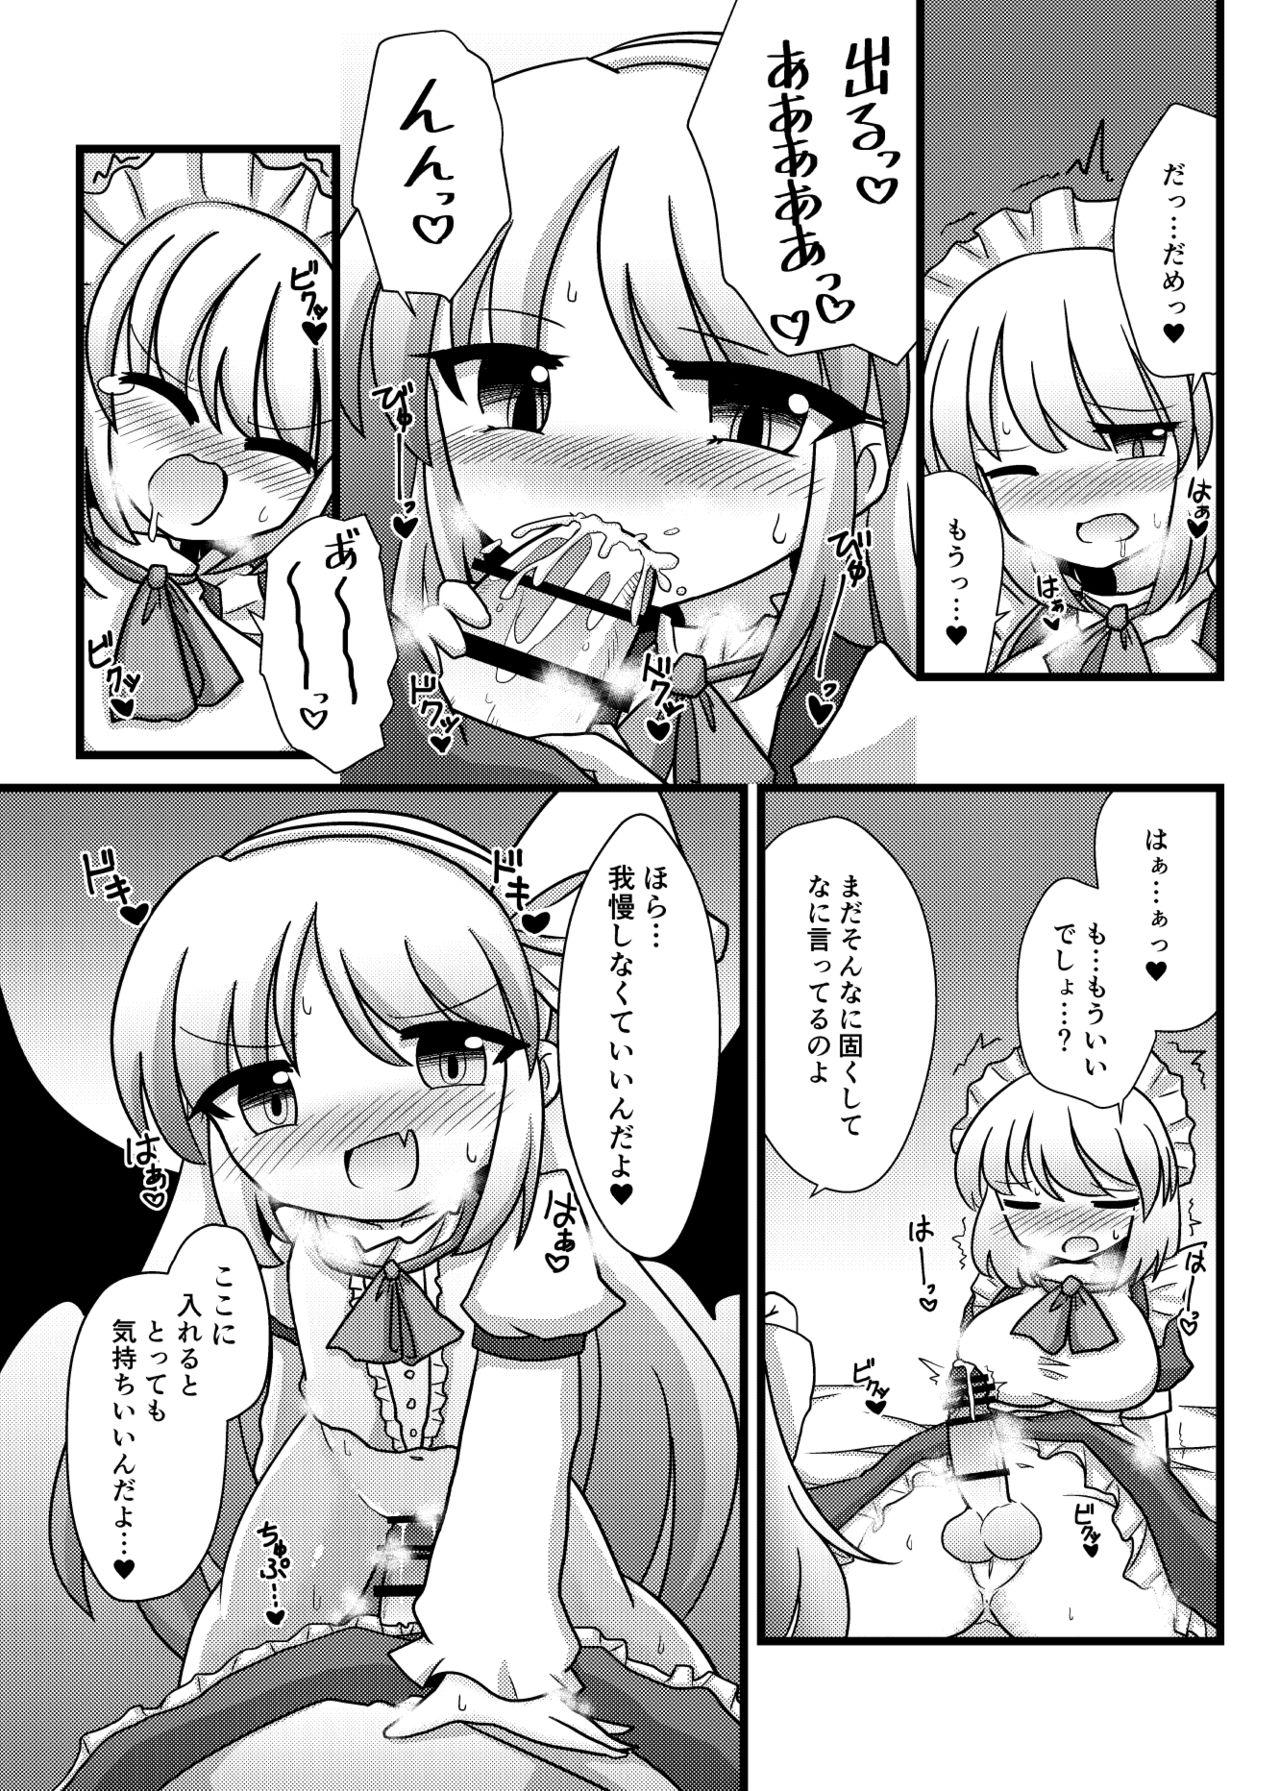 Cuckolding 旧作エロ合同に寄稿した漫画 - Touhou project Holes - Page 3